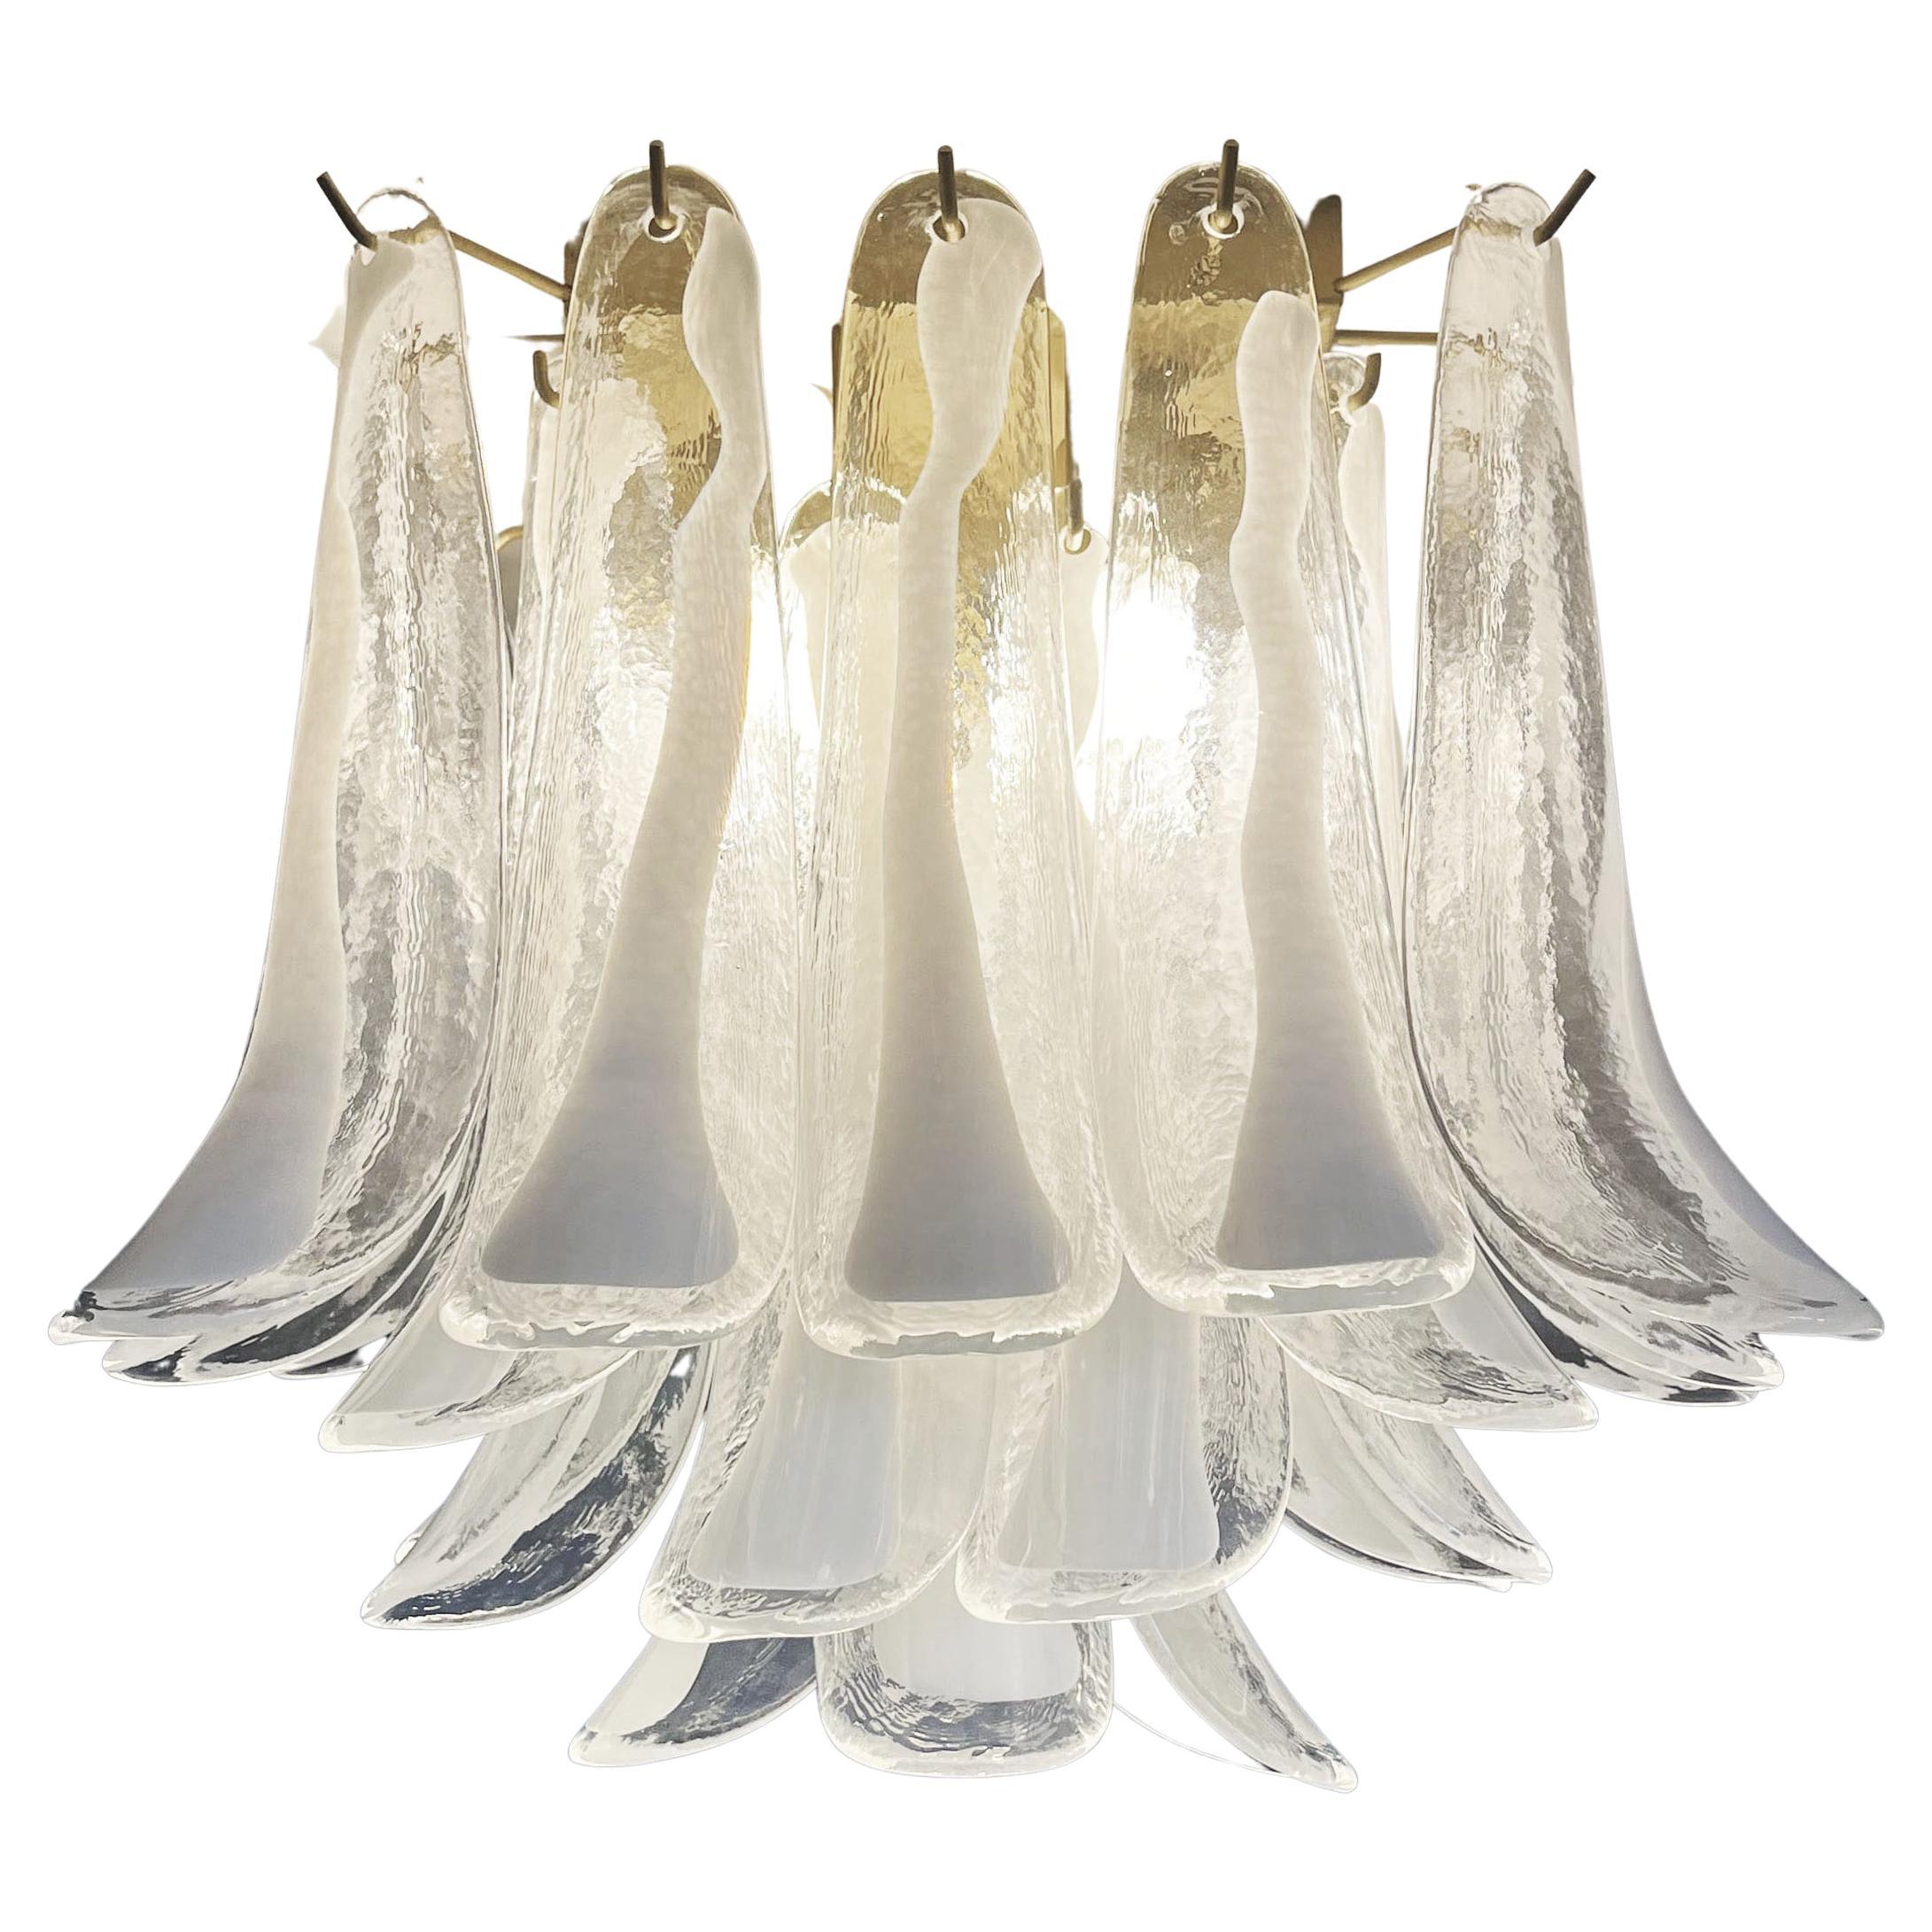 Spectacular ceiling lamp with 32 Murano lattimo glass petals (clear with white lattimo spot) in golden painted metal frame. Elegant lighting object.
Period: late XX century
Dimensions: 19,20 inchs (50 cm) height; 19,20 inches (50 cm) width; 19,20